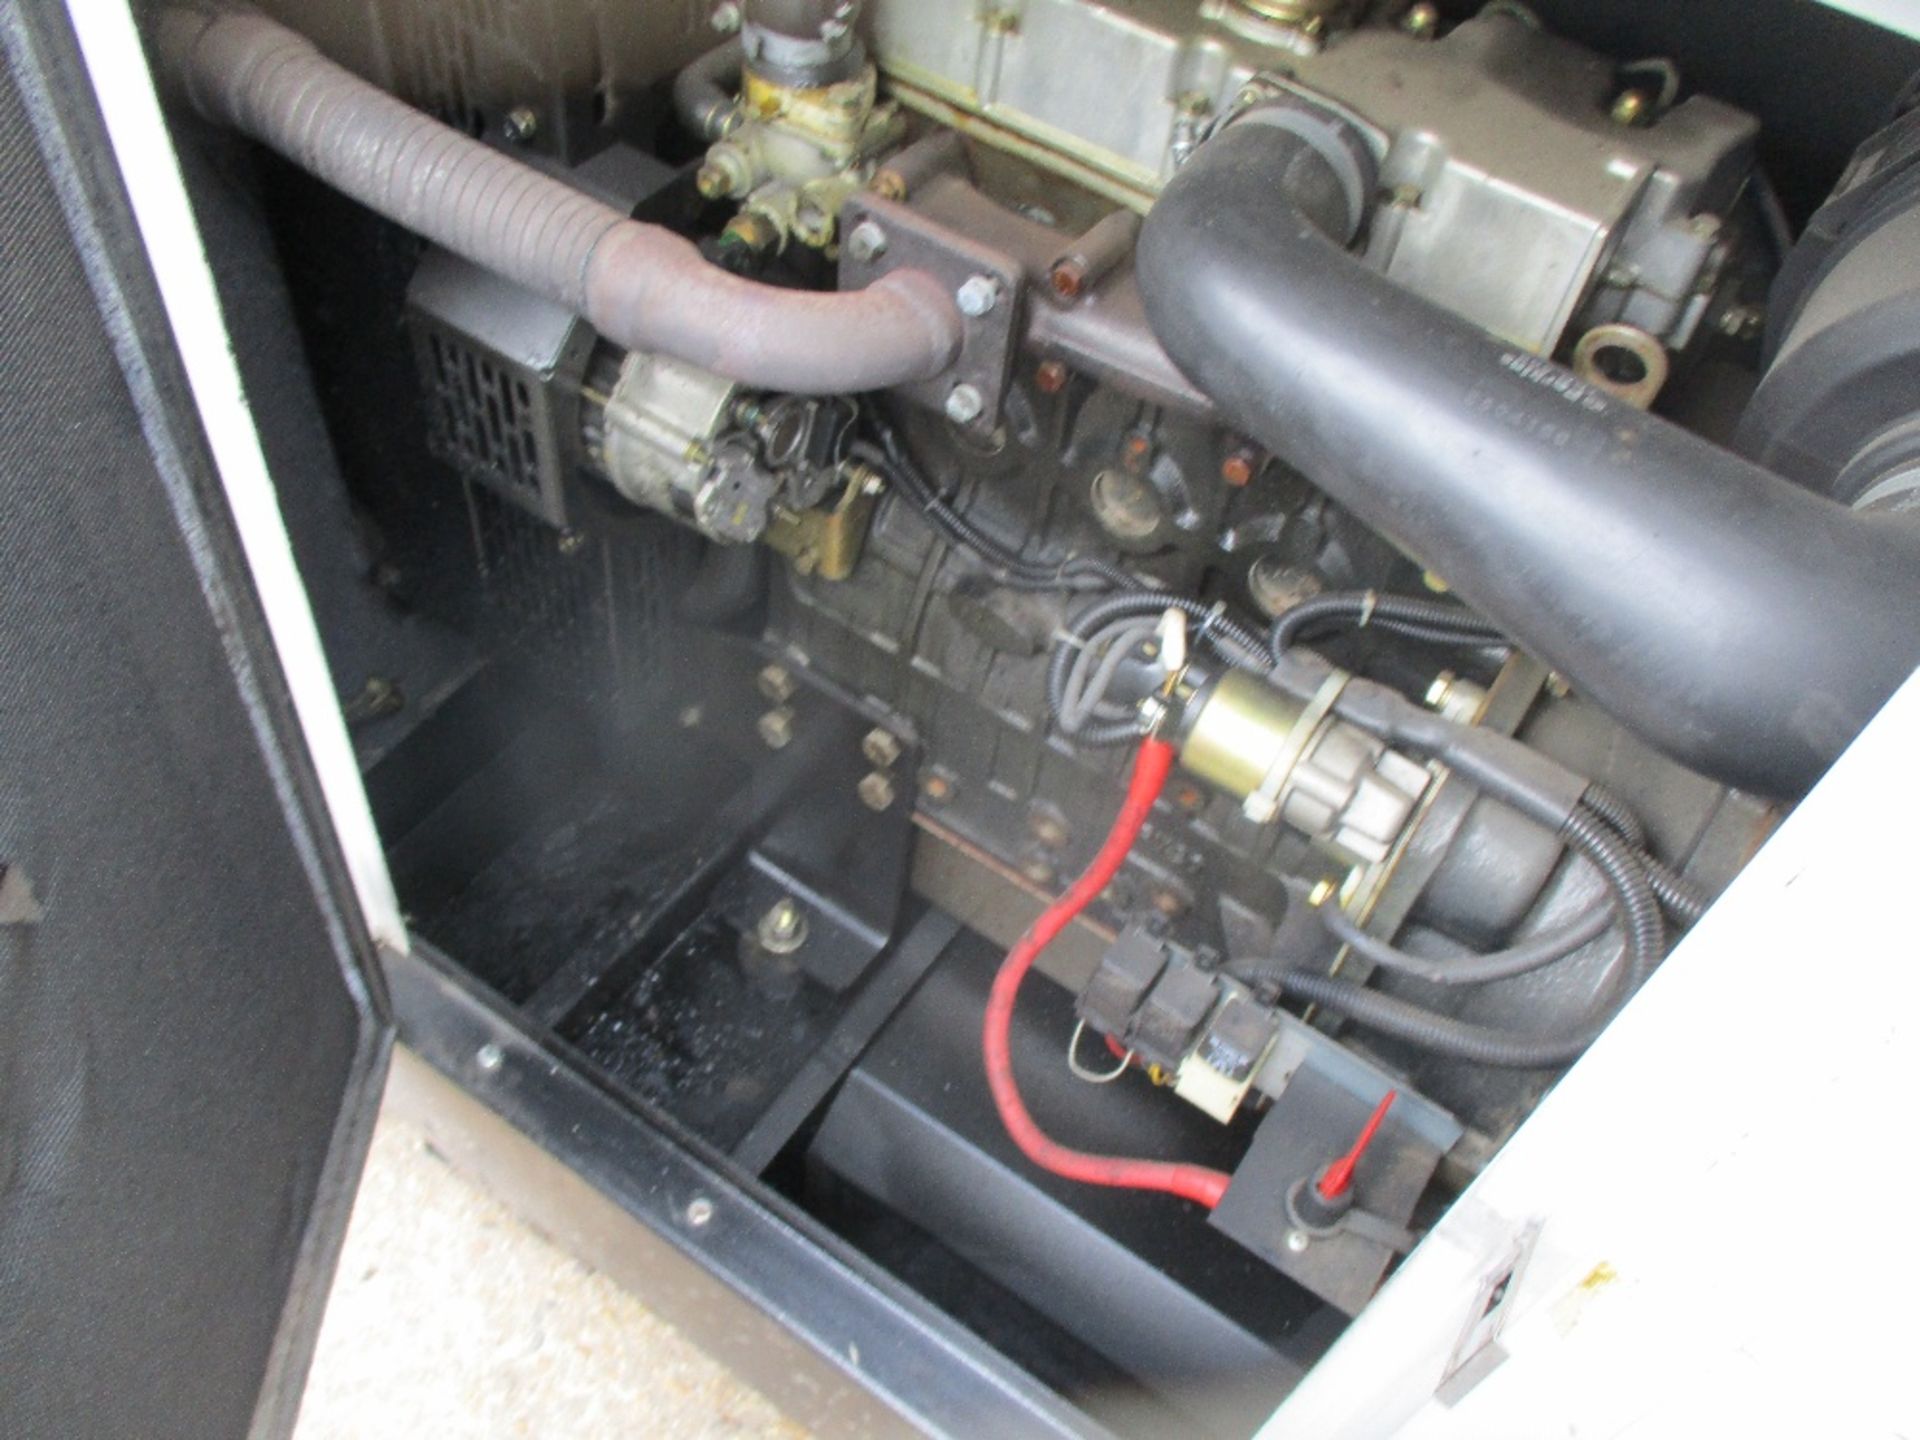 SMC POWERMASTER GQ22P 22KVA SILENCED GENERATOR, 4310 REC HRS, PERKINS ENGINE. WHEN TESTED WAS SEEN T - Image 3 of 3